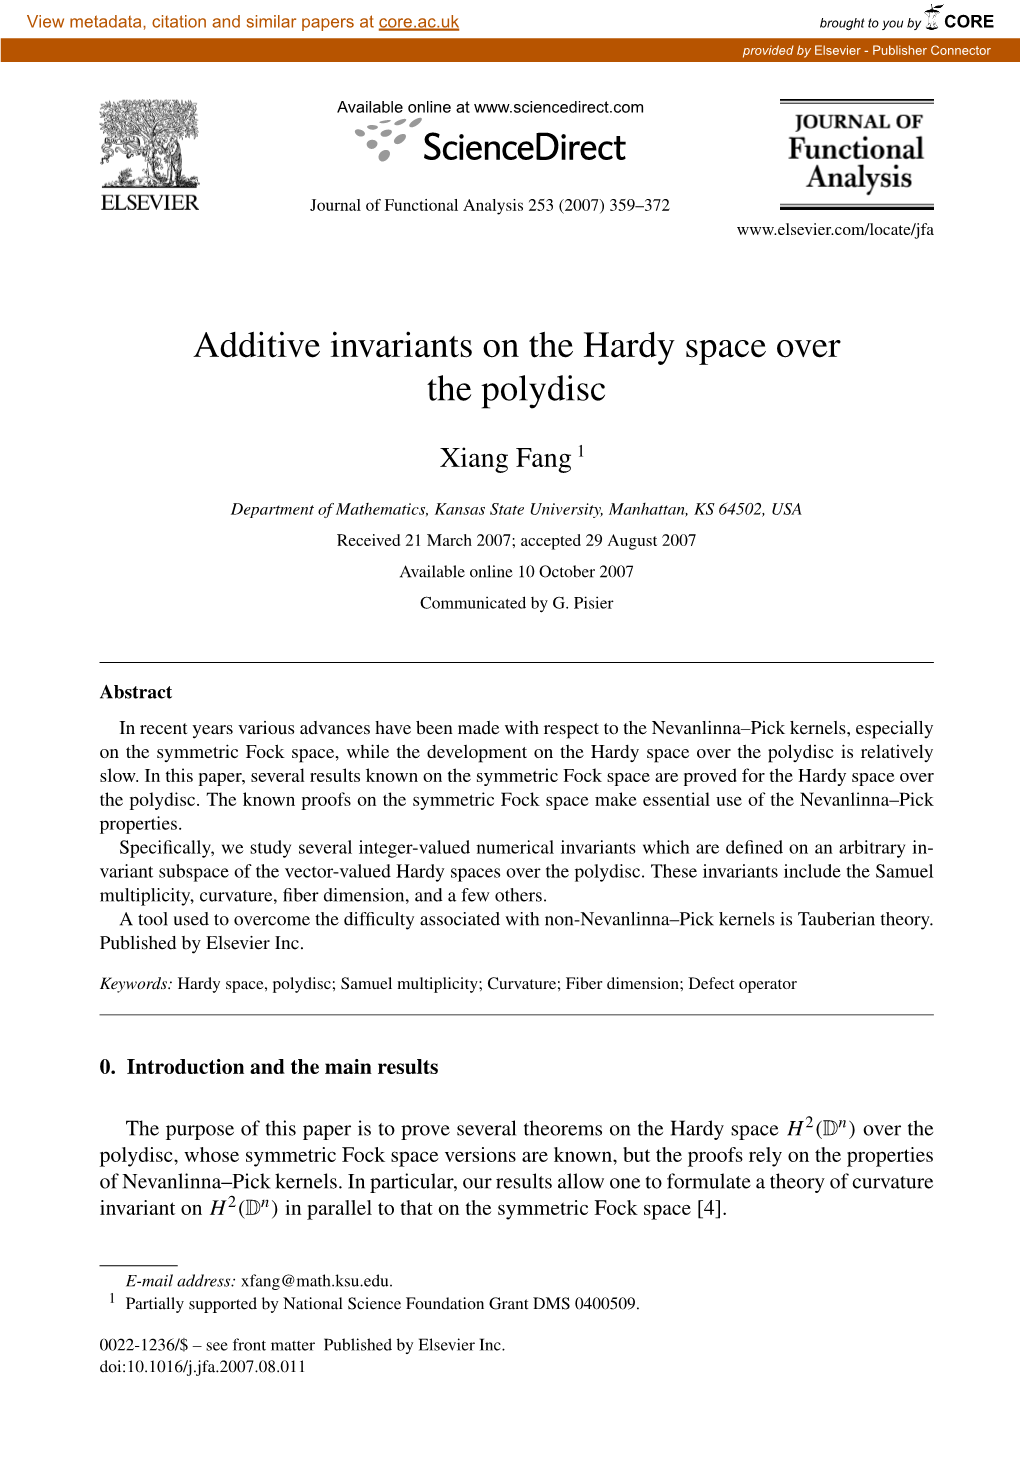 Additive Invariants on the Hardy Space Over the Polydisc